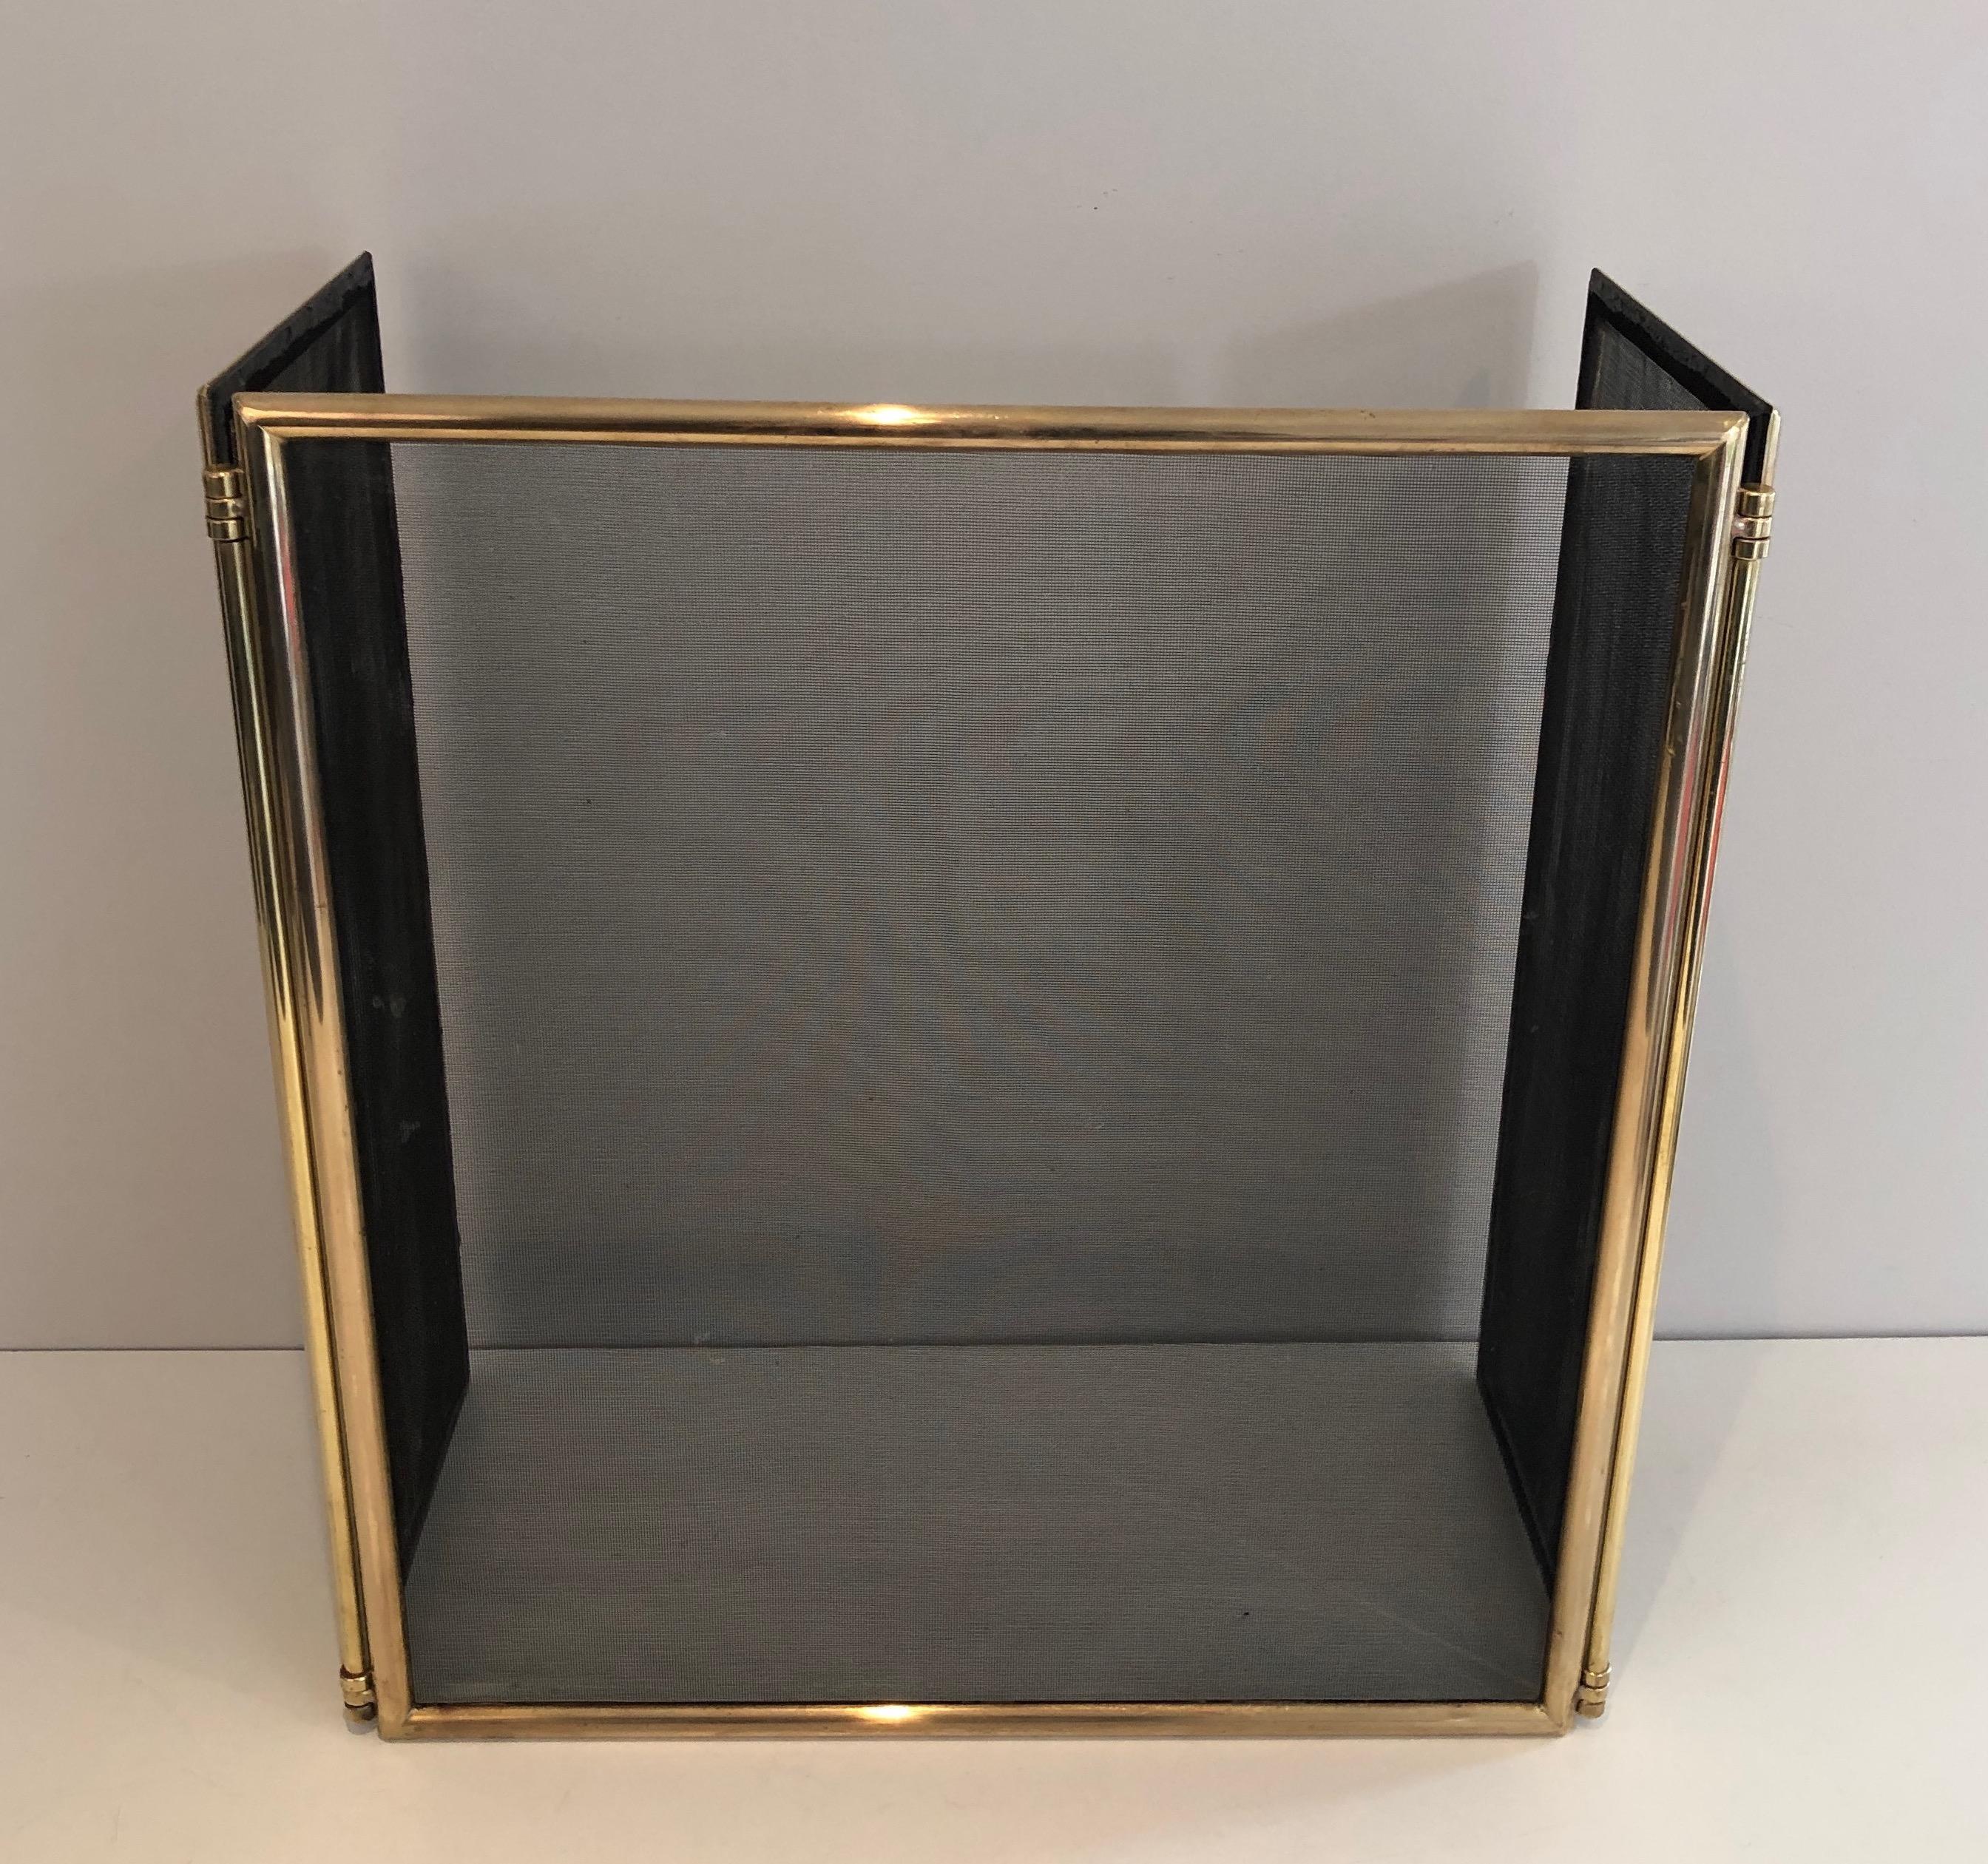 French Neoclassical Style Brass and Grilling Folding Fireplace Screen, Circa 1970